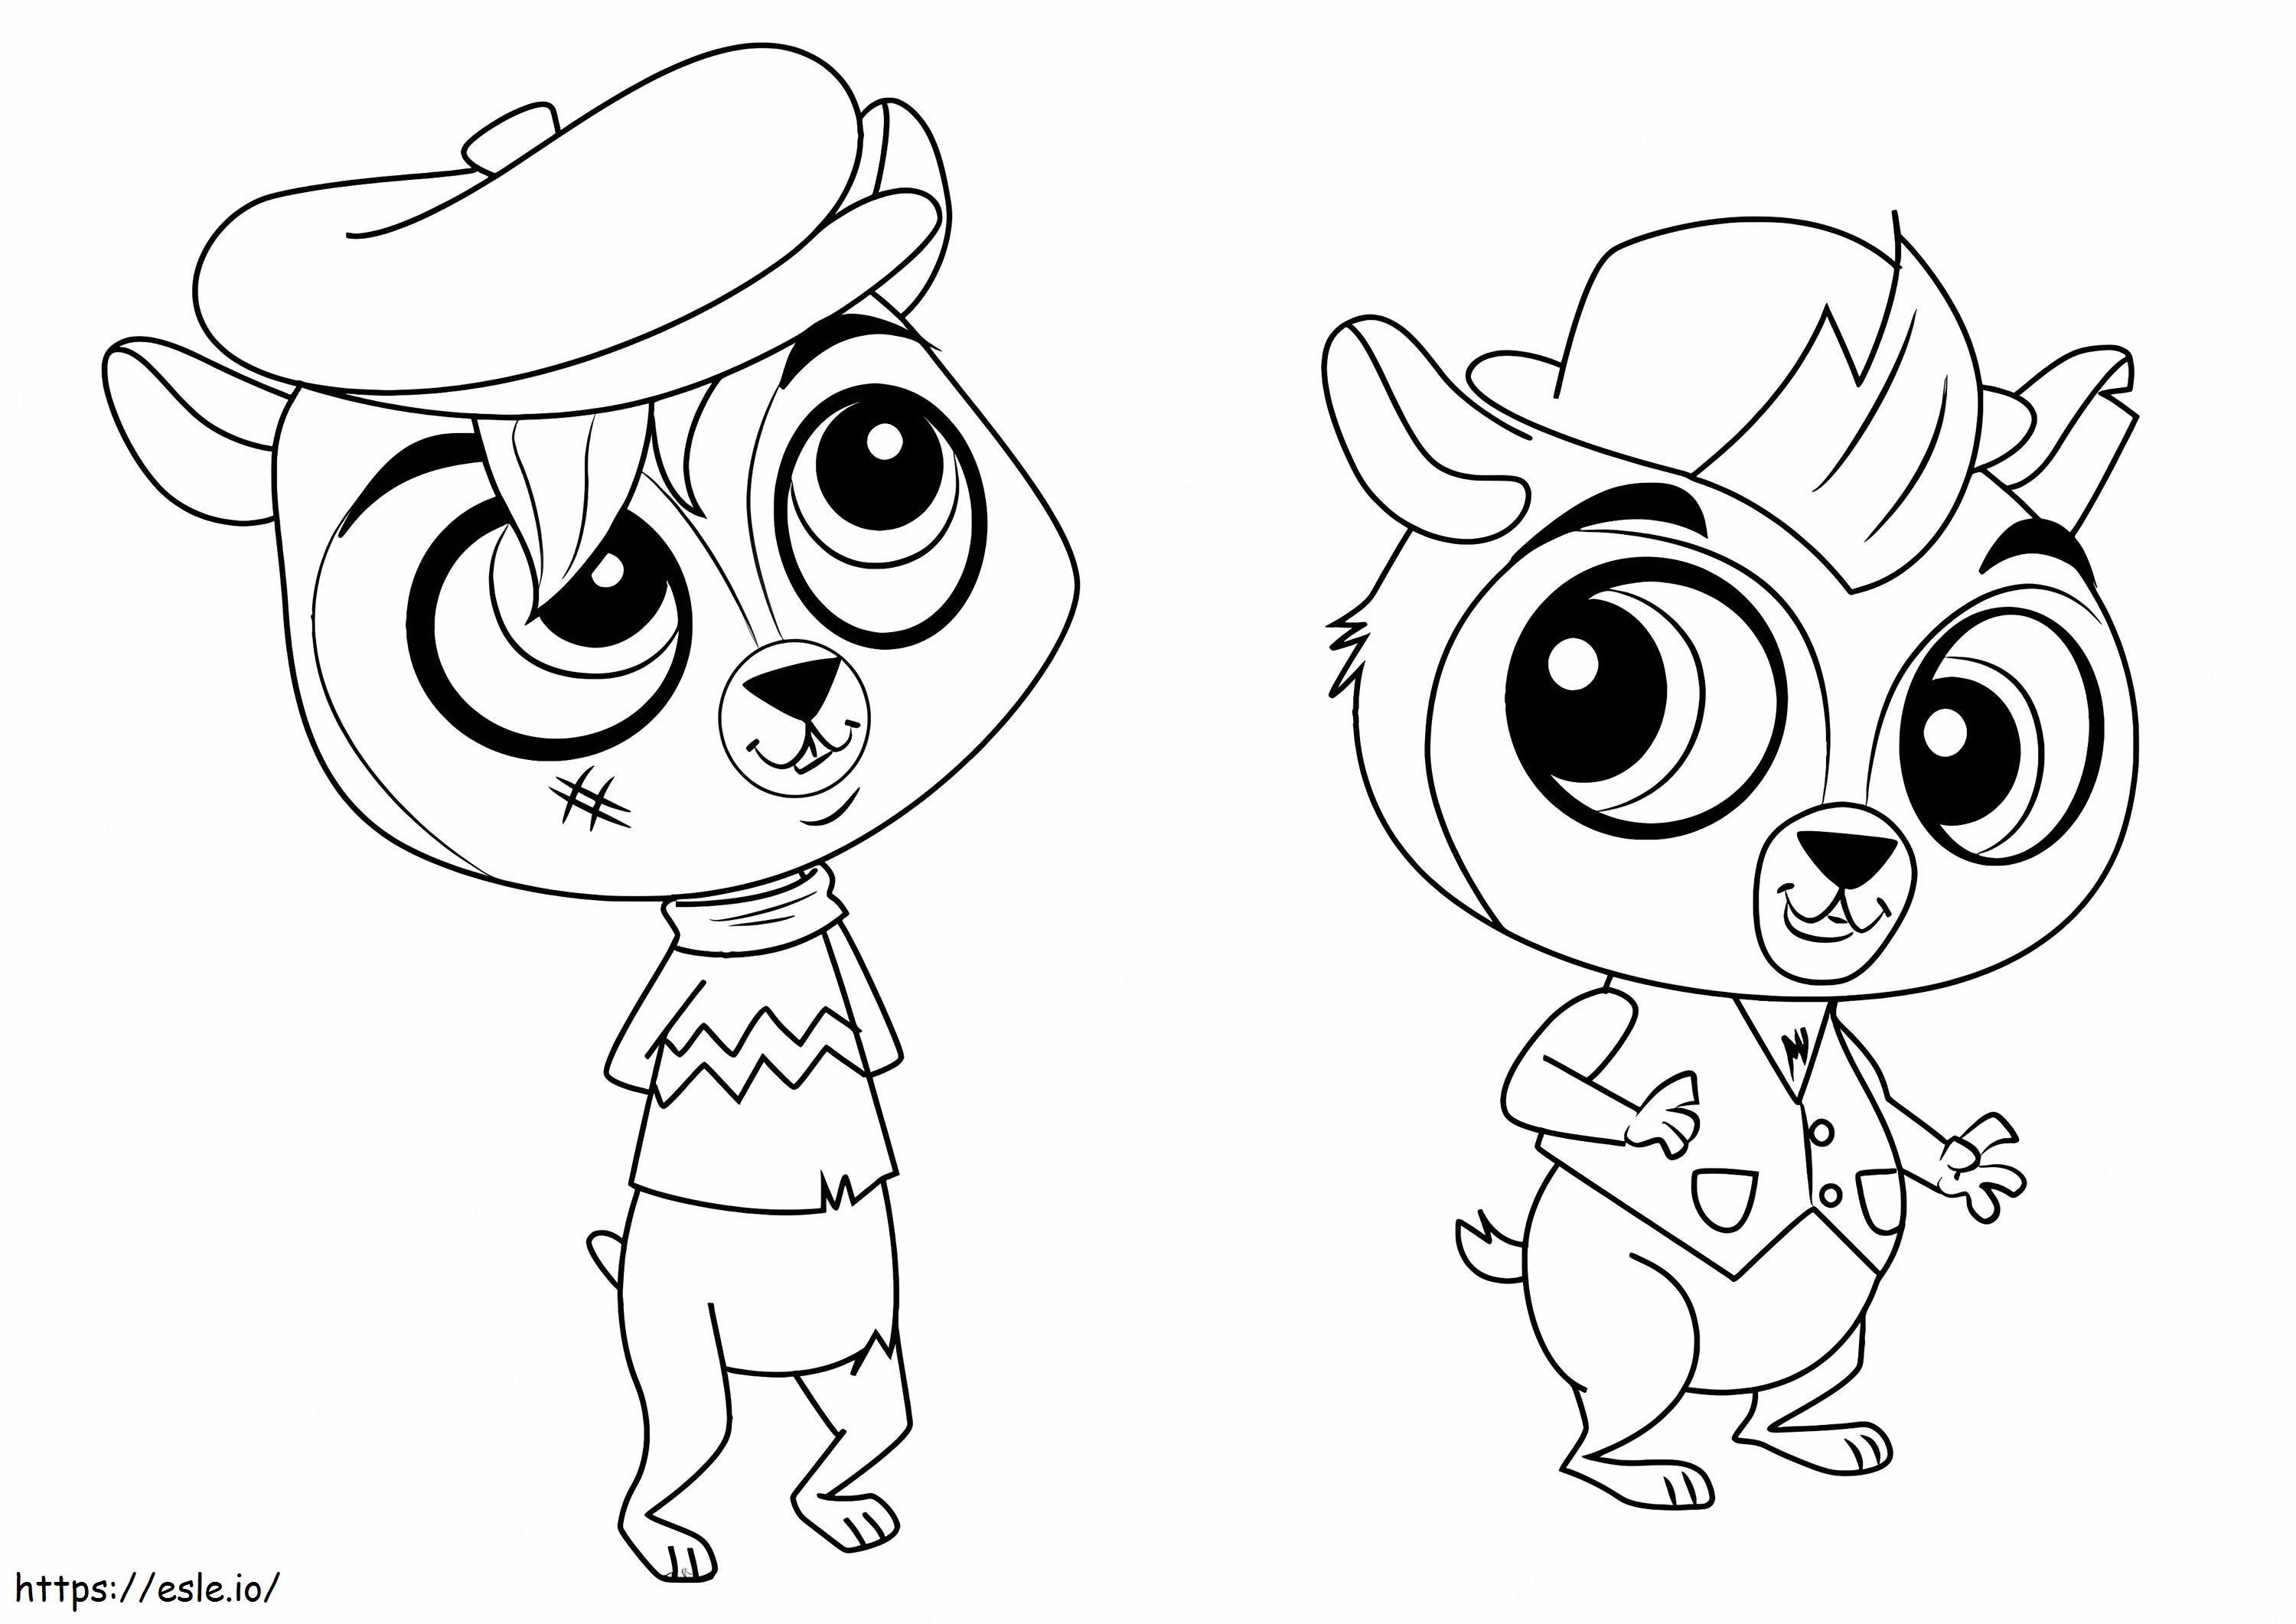 1589876103 How To Draw Dodger And Twist From Littlest Pet Shop Step 0 coloring page